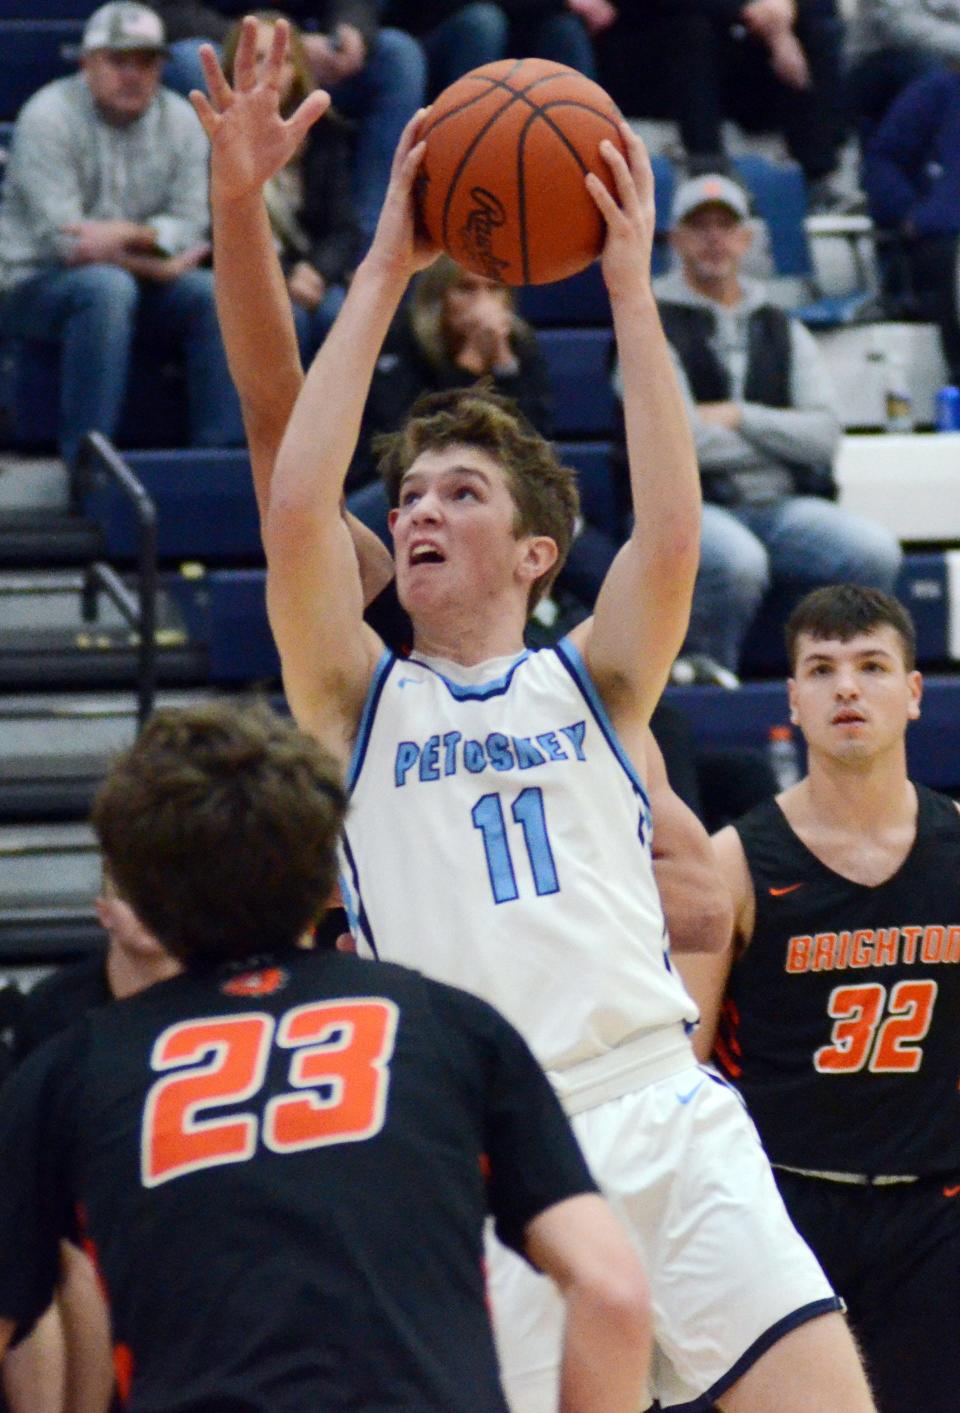 Shane Izzard's second year at the varsity level with Petoskey came with second team All-BNC honors as a junior.